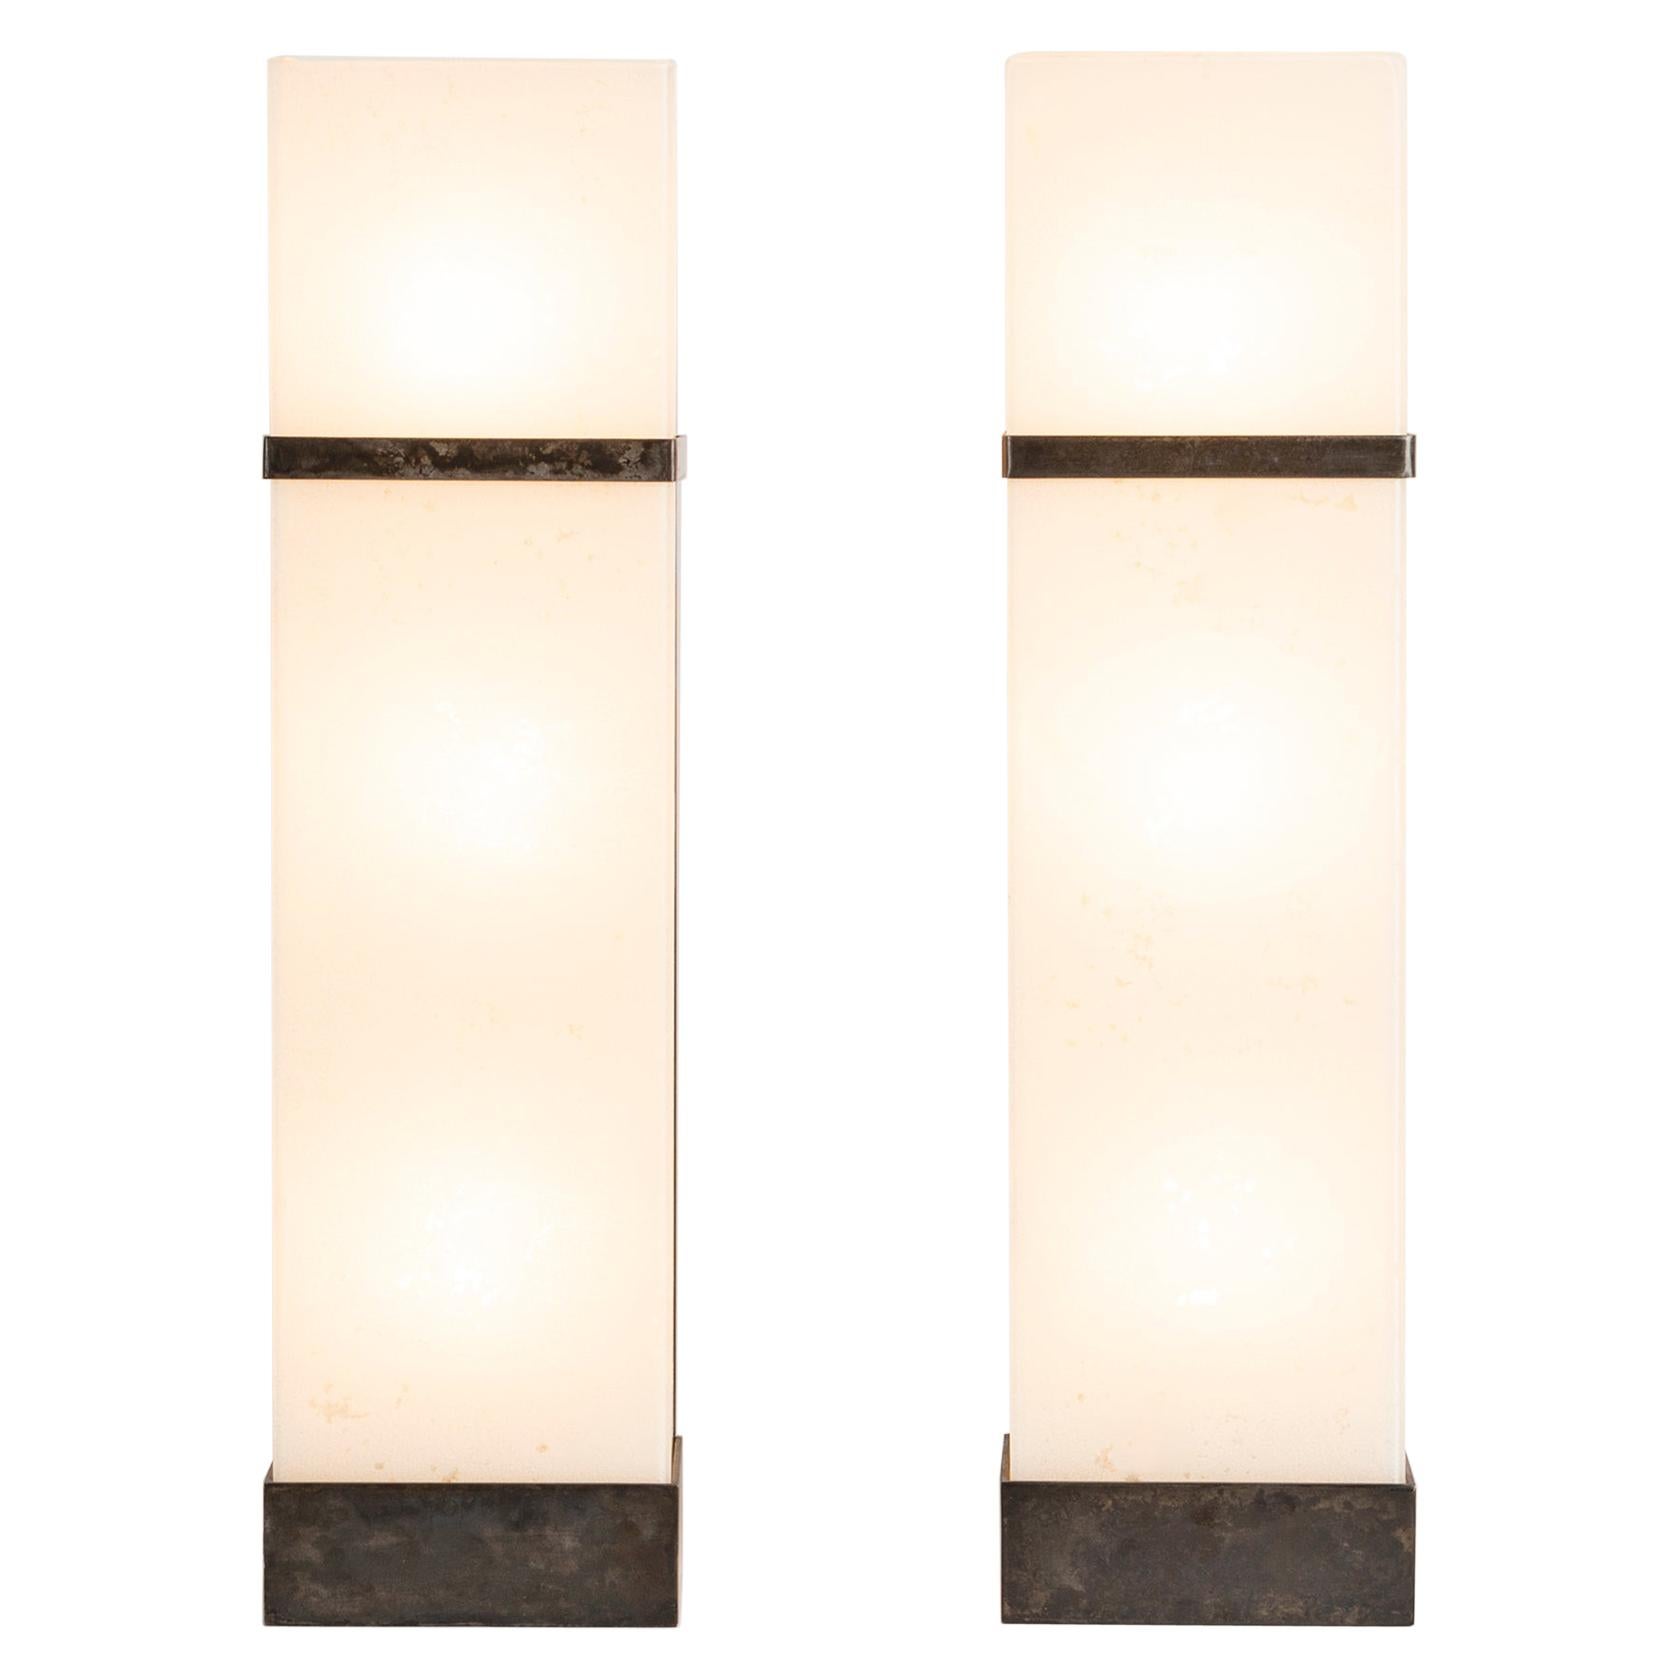 Kiko Lopez, Pair of Rectangular Frosted Sconces, France, 1999